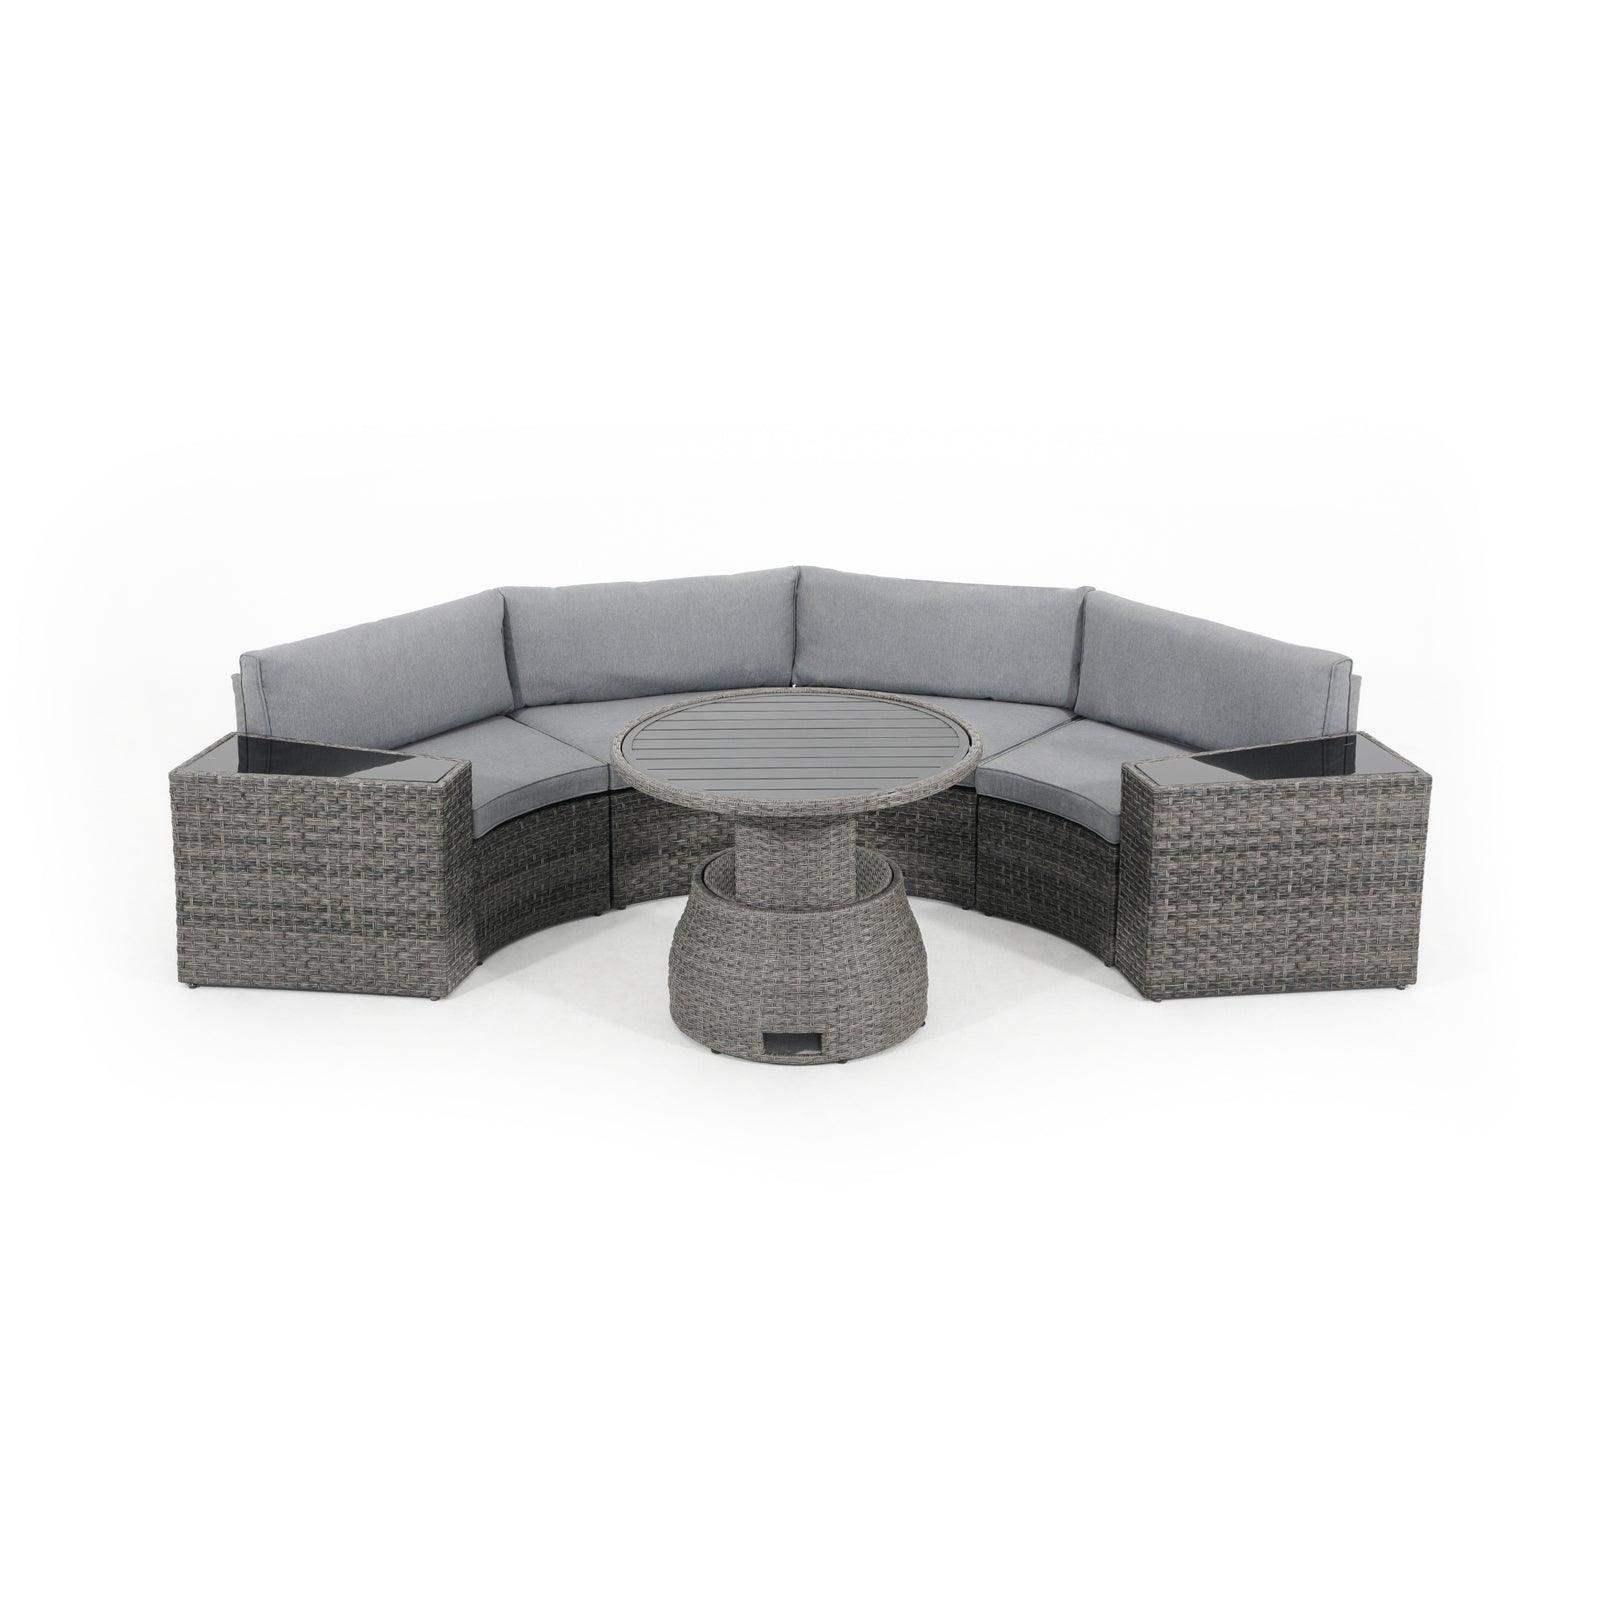 Boboli Modern Curved Wicker Outdoor Furniture, 4-seater Grey Outdoor Wicker Curved Sectional sofas with grey cushions + 2 wicker side tables + 1 Lift-top round table, front view - Jardina Furniture#color_Grey#piece_7-pc.